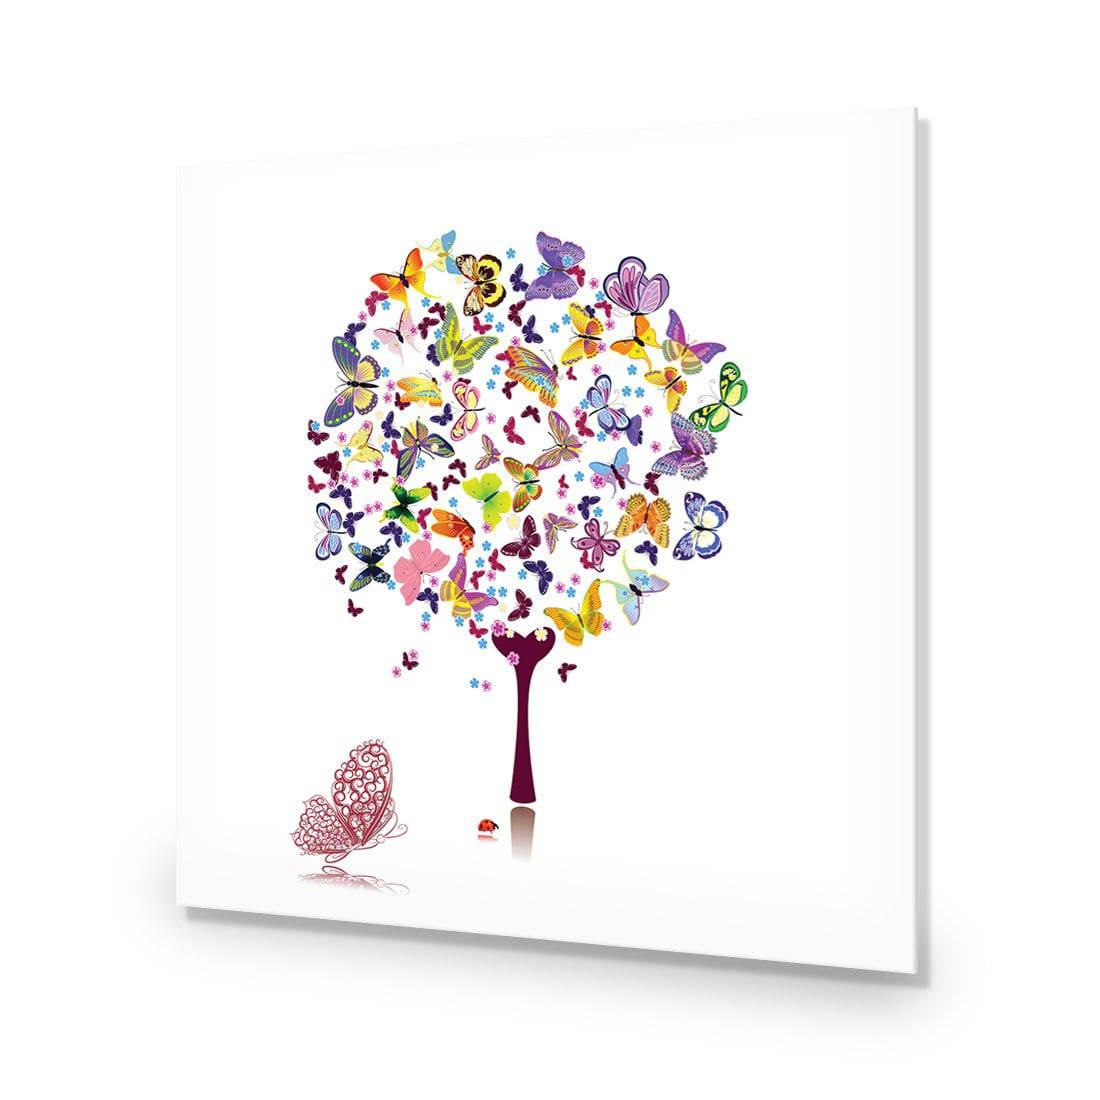 Day Dream Tree, Square-Acrylic-Wall Art Design-Without Border-Acrylic - No Frame-37x37cm-Wall Art Designs